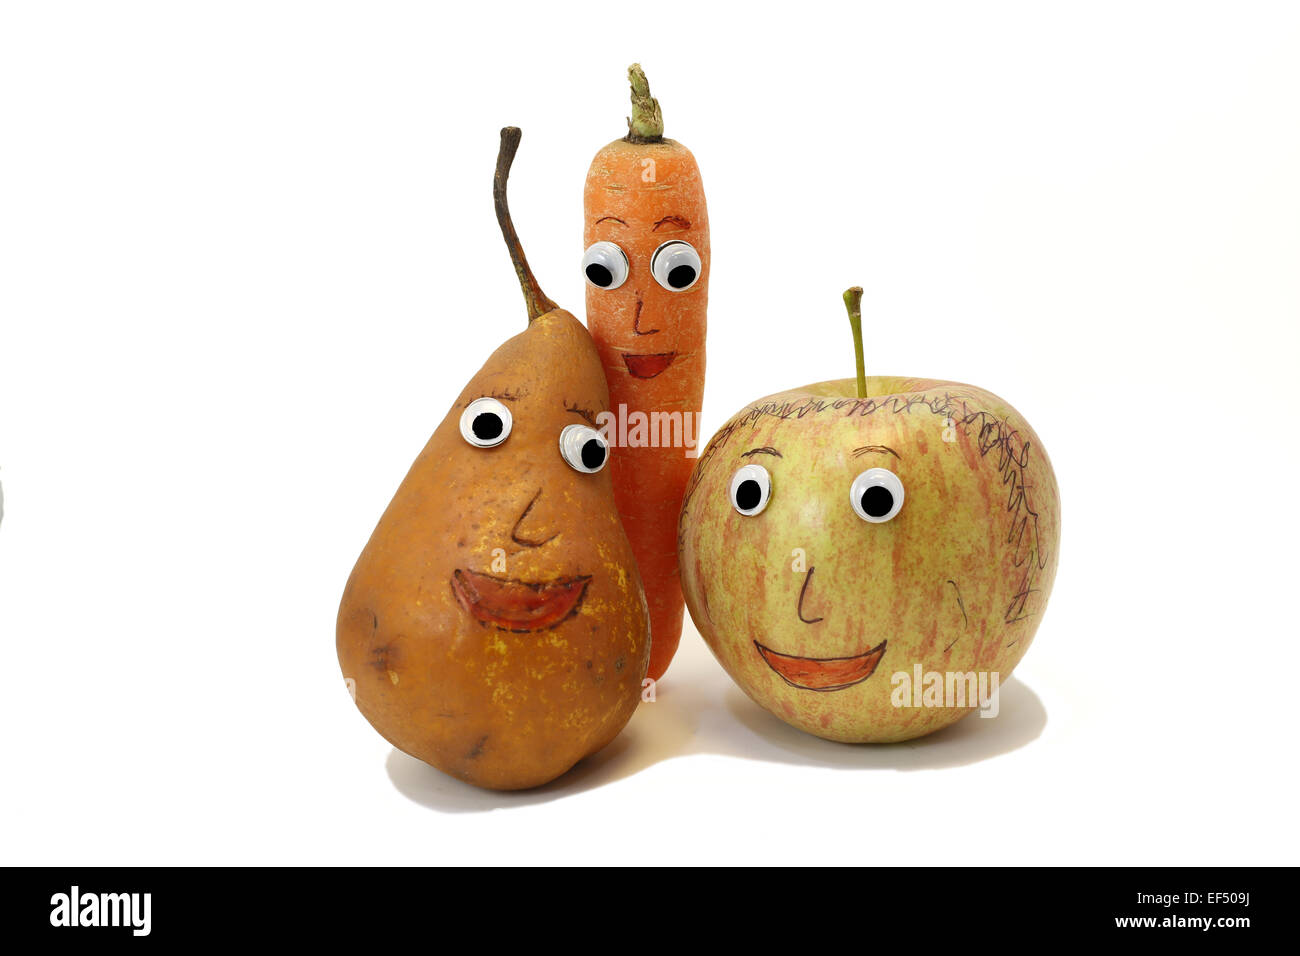 PEAR and carrot and one apple with big eyes Stock Photo